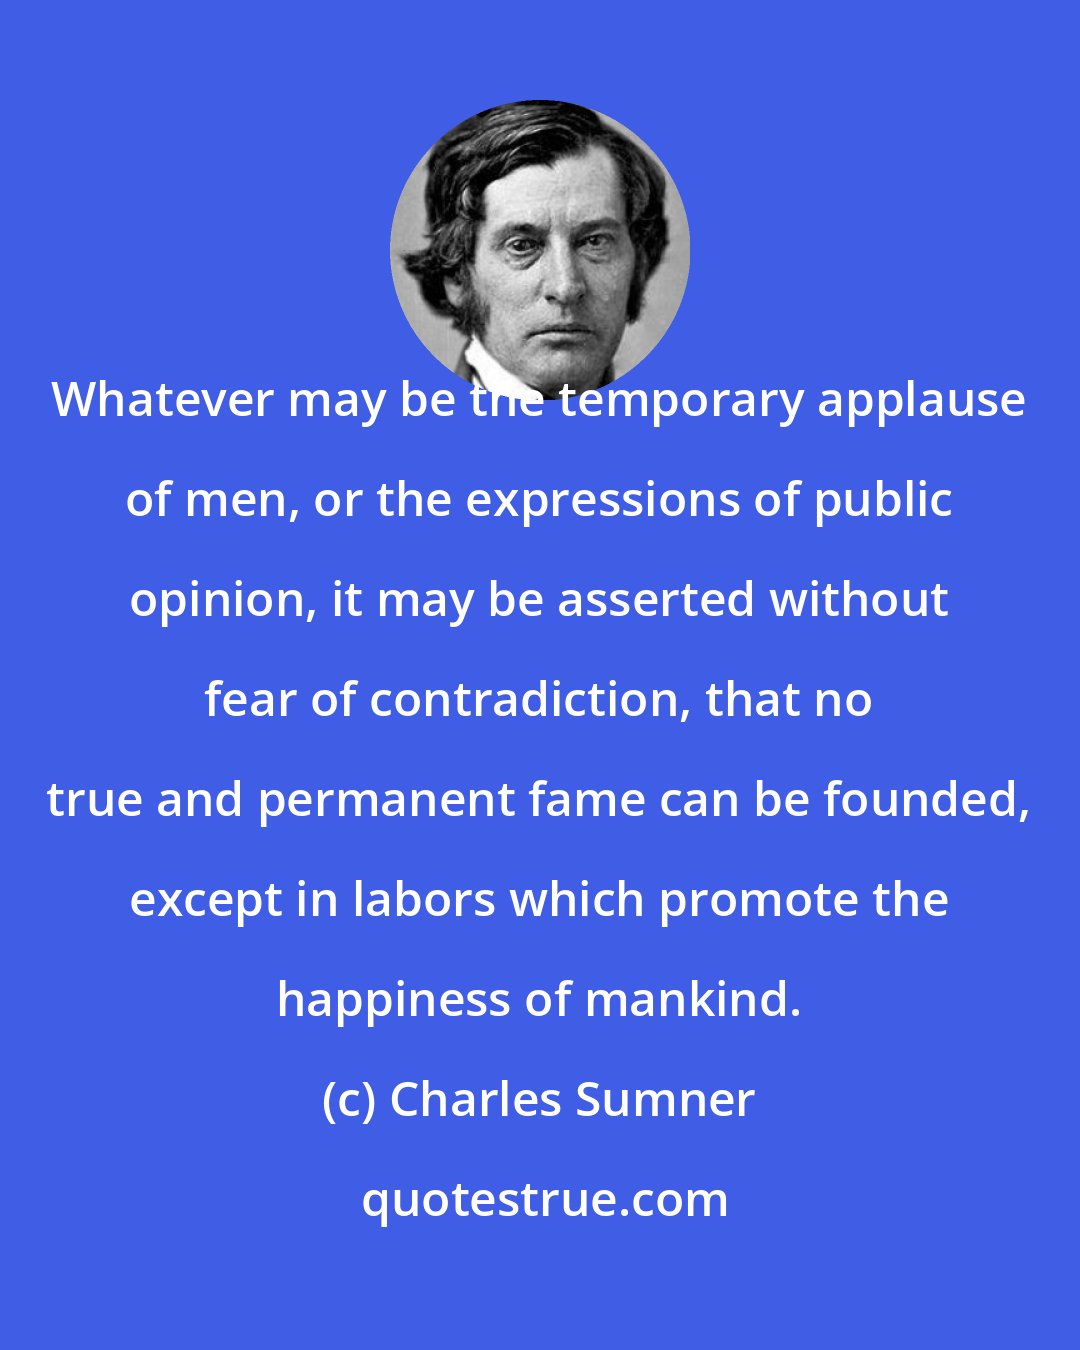 Charles Sumner: Whatever may be the temporary applause of men, or the expressions of public opinion, it may be asserted without fear of contradiction, that no true and permanent fame can be founded, except in labors which promote the happiness of mankind.